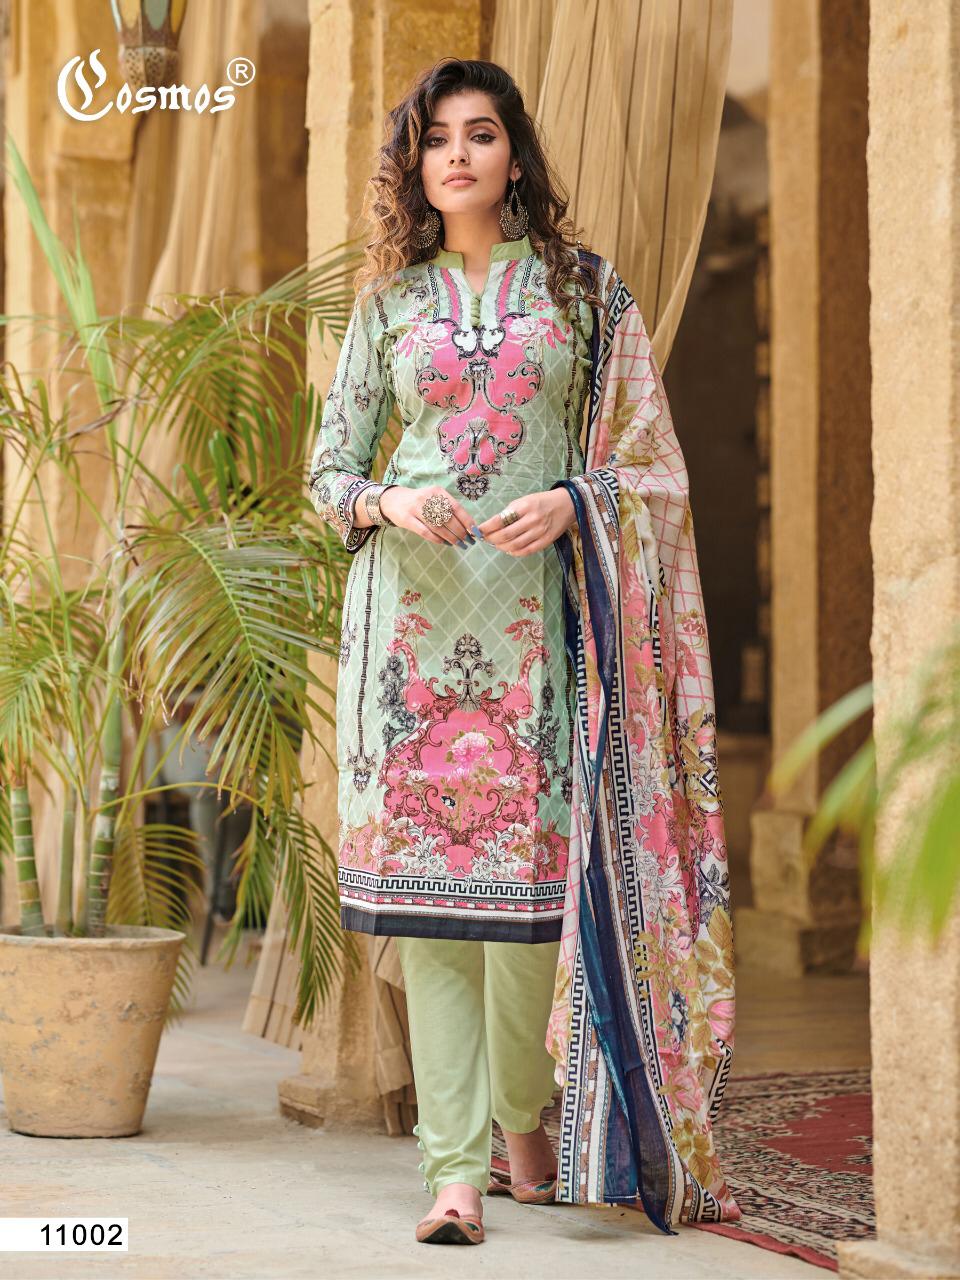 Cosmos Fashion Saadia Noor Vol 2 Printed Pure Lawn Cotton With Embroidery Work Dress Material